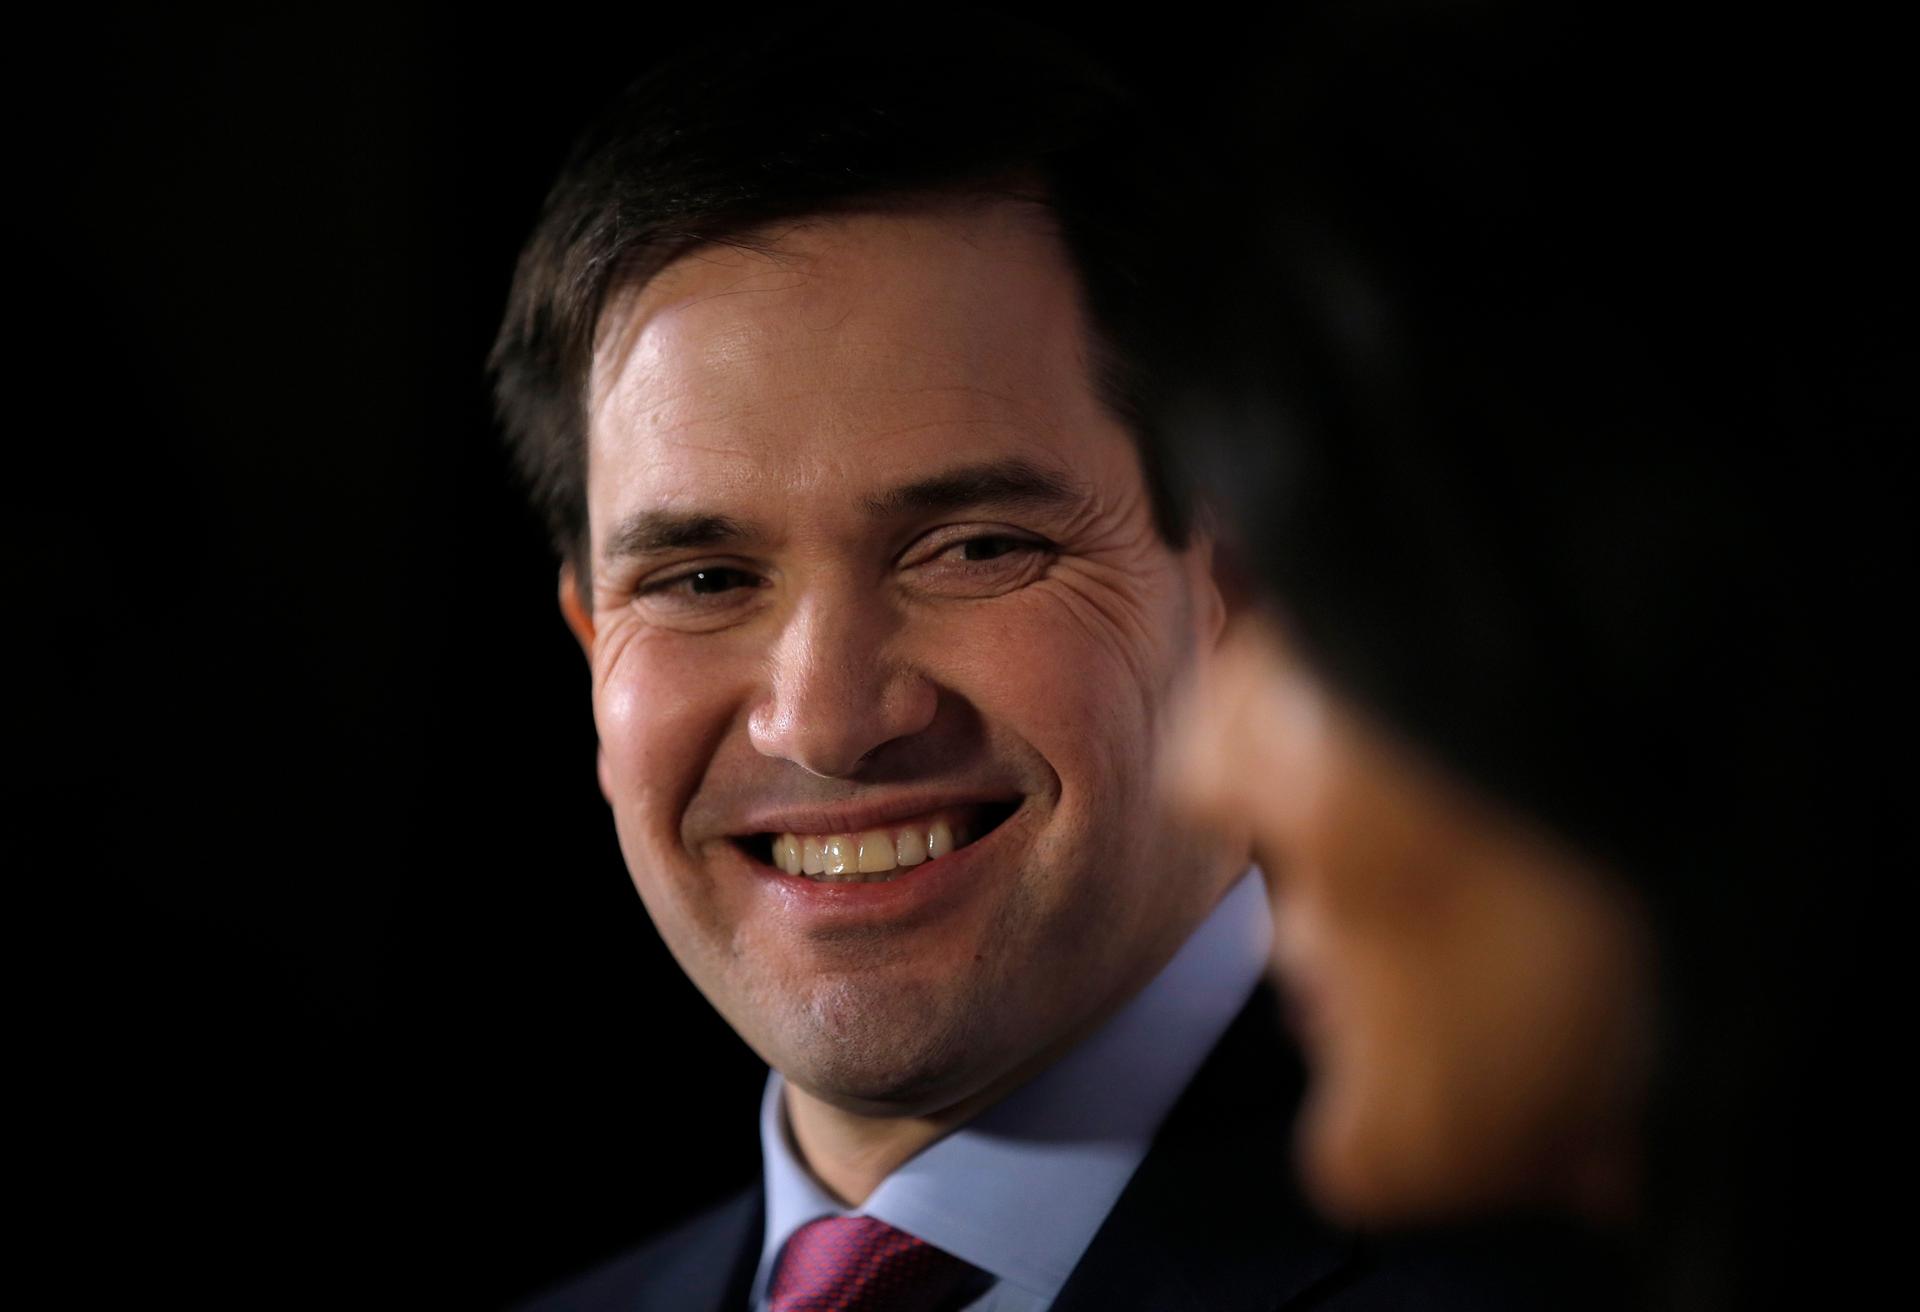 U.S. Republican presidential candidate Marco Rubio smiles as South Carolina Governor Nikki Haley speaks to reporters before a campaign event in Anderson, South Carolina February 18, 2016.